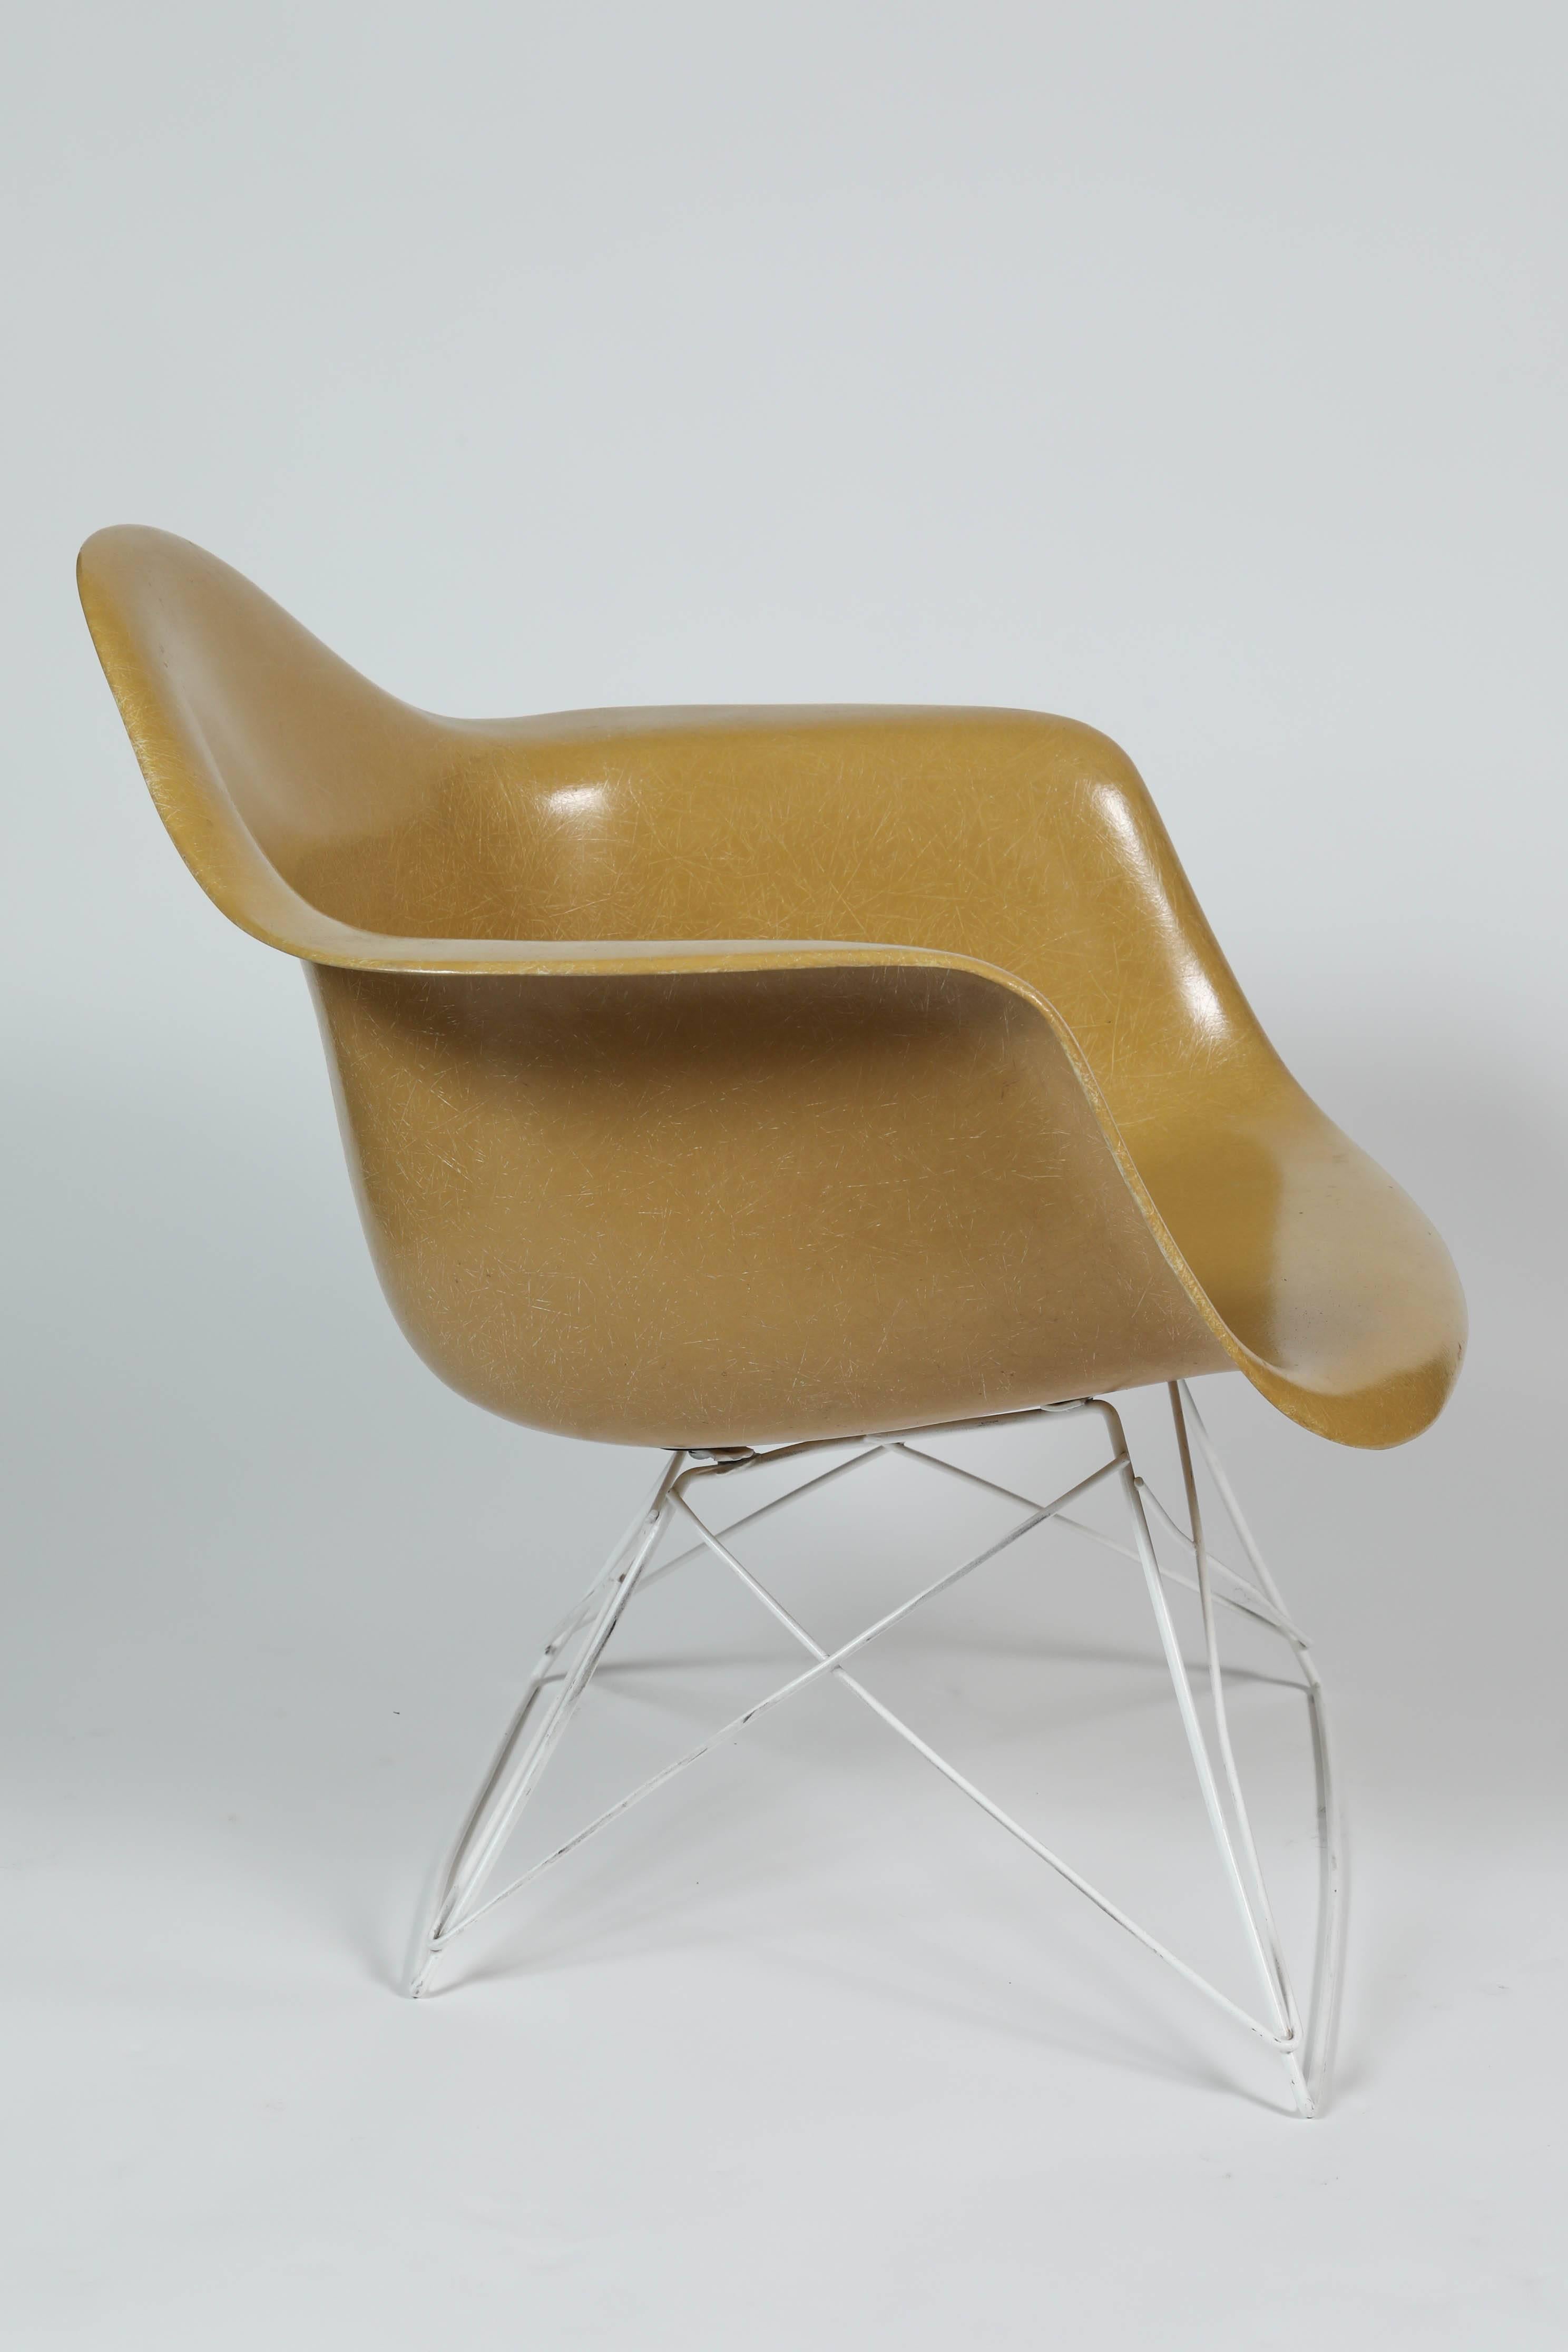 Mid-20th Century Pair of Eames Herman Miller Cat's Cradle Base Chairs